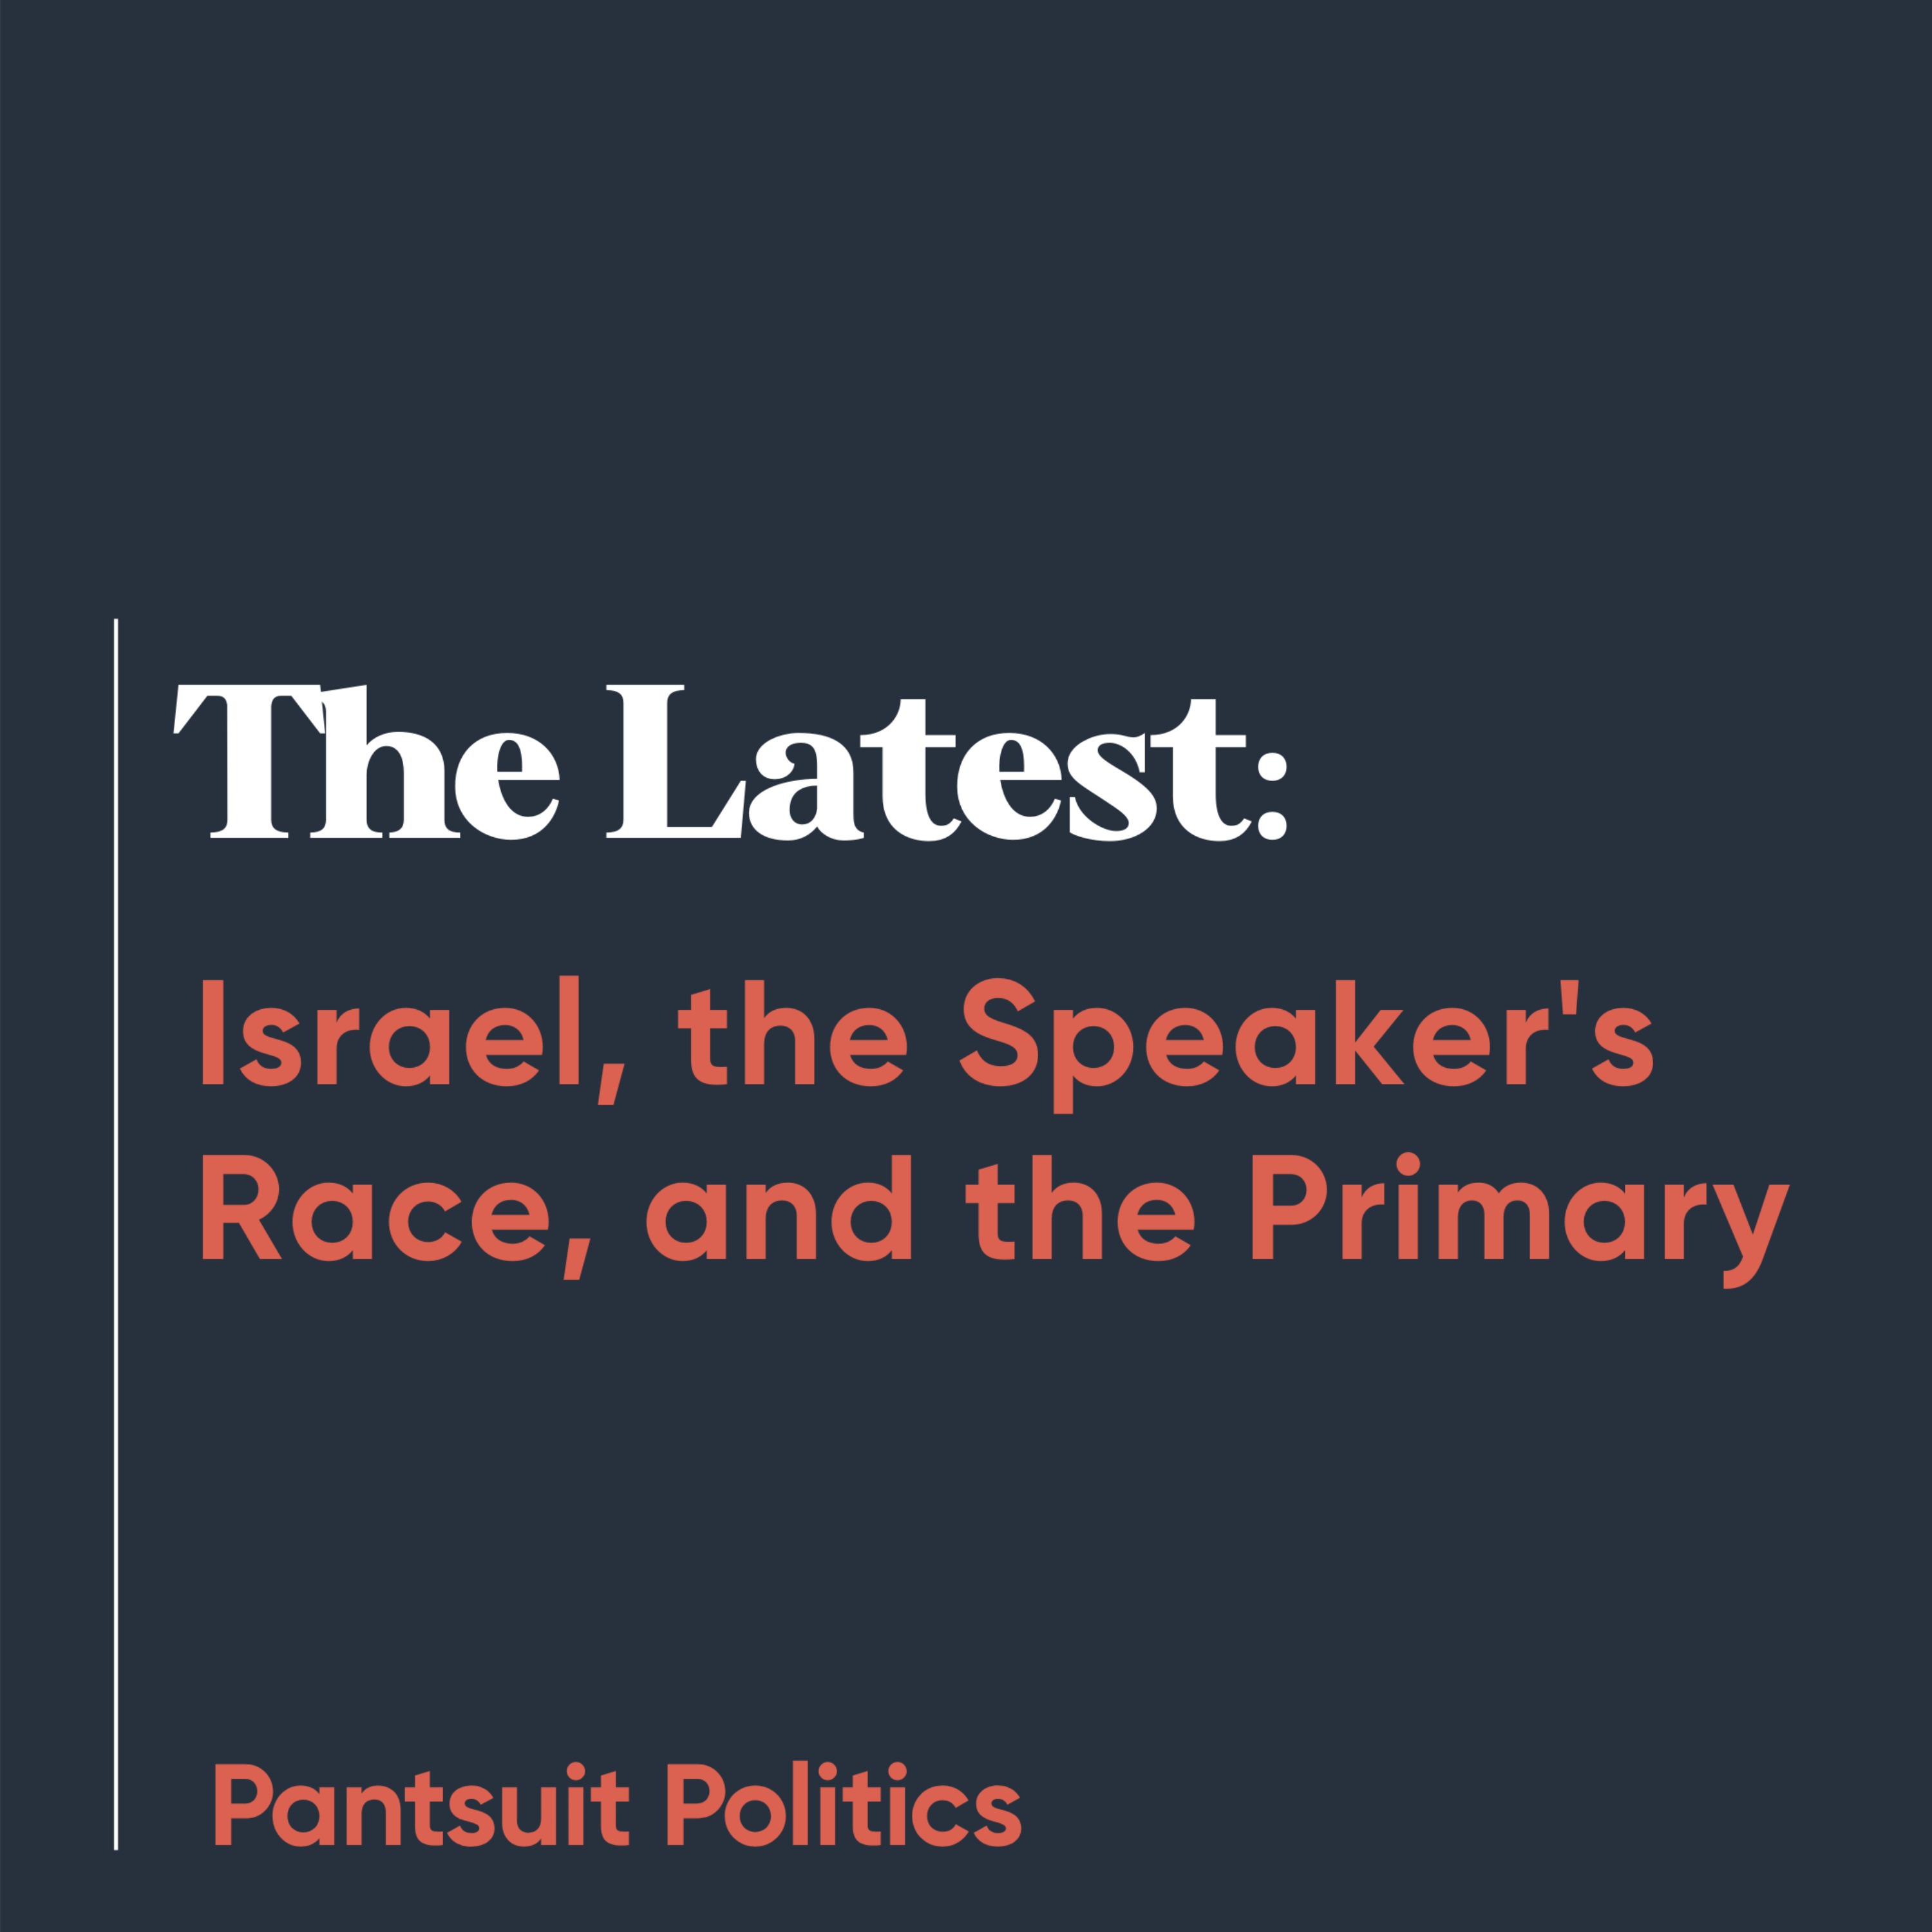 The Latest: Israel, the Speaker's Race, and the Primary